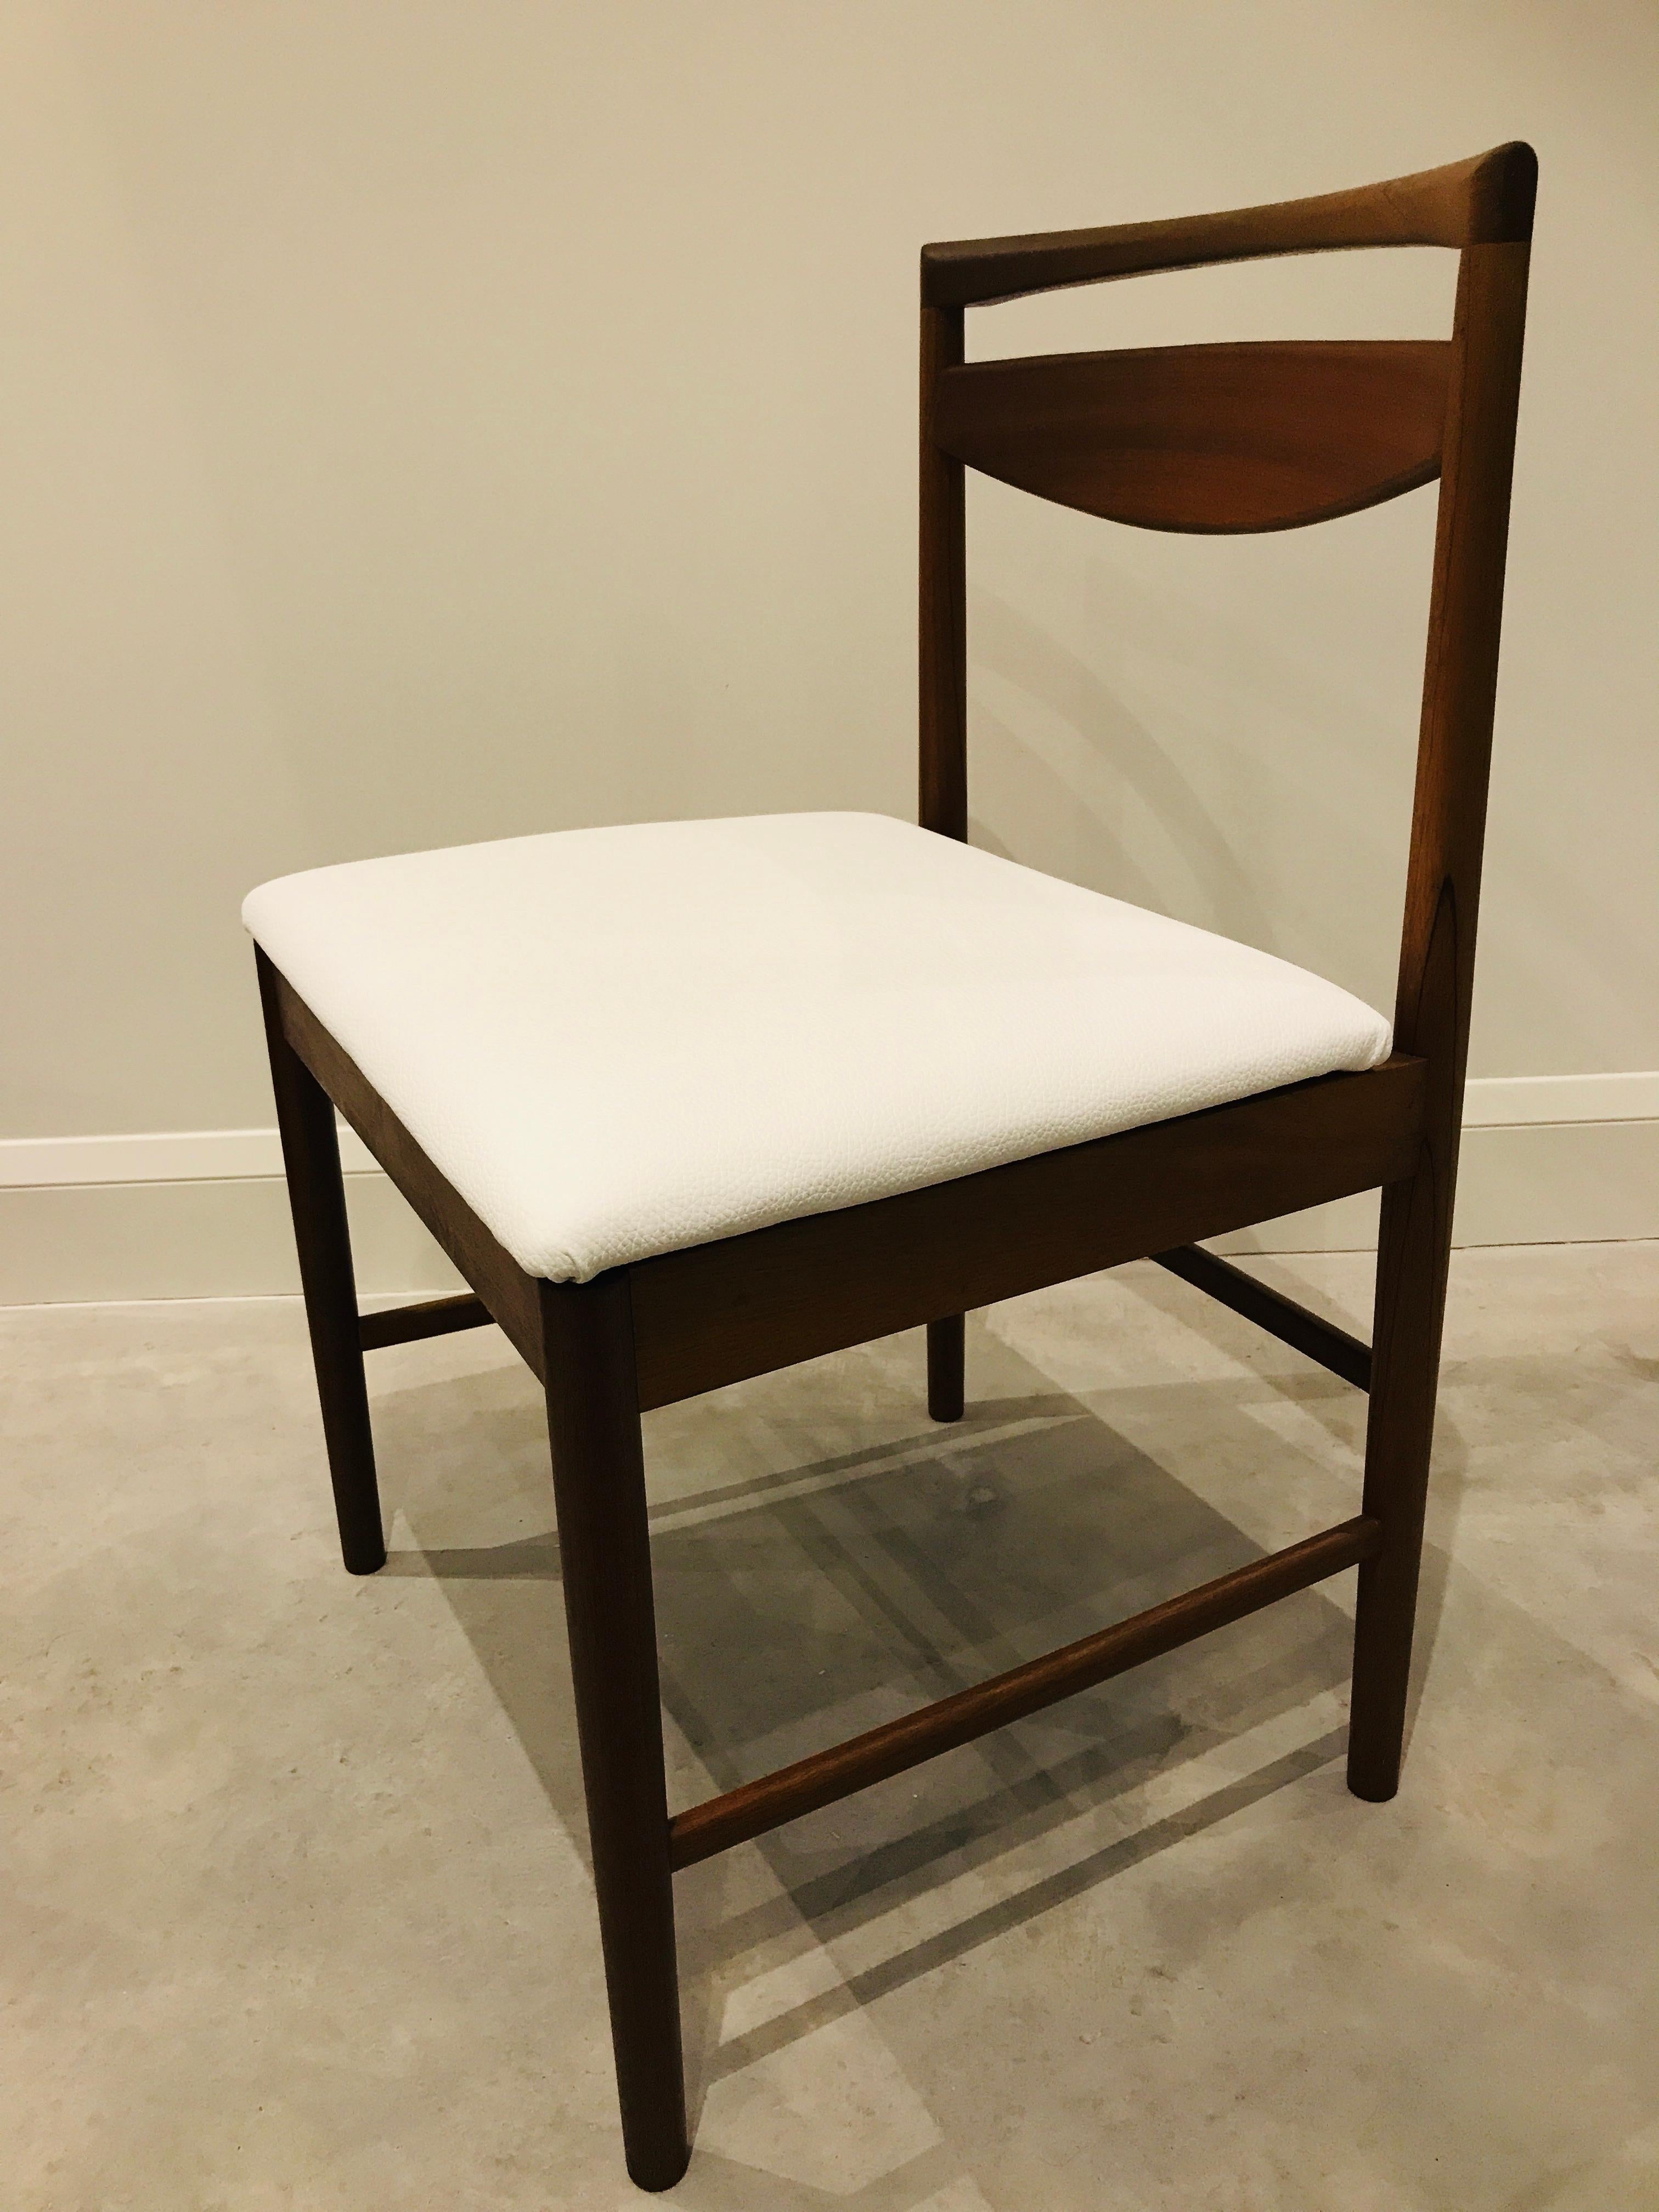 1970 Vintage Teak McIntosh Retro Dining Chairs Upholstered in White Leather For Sale 3